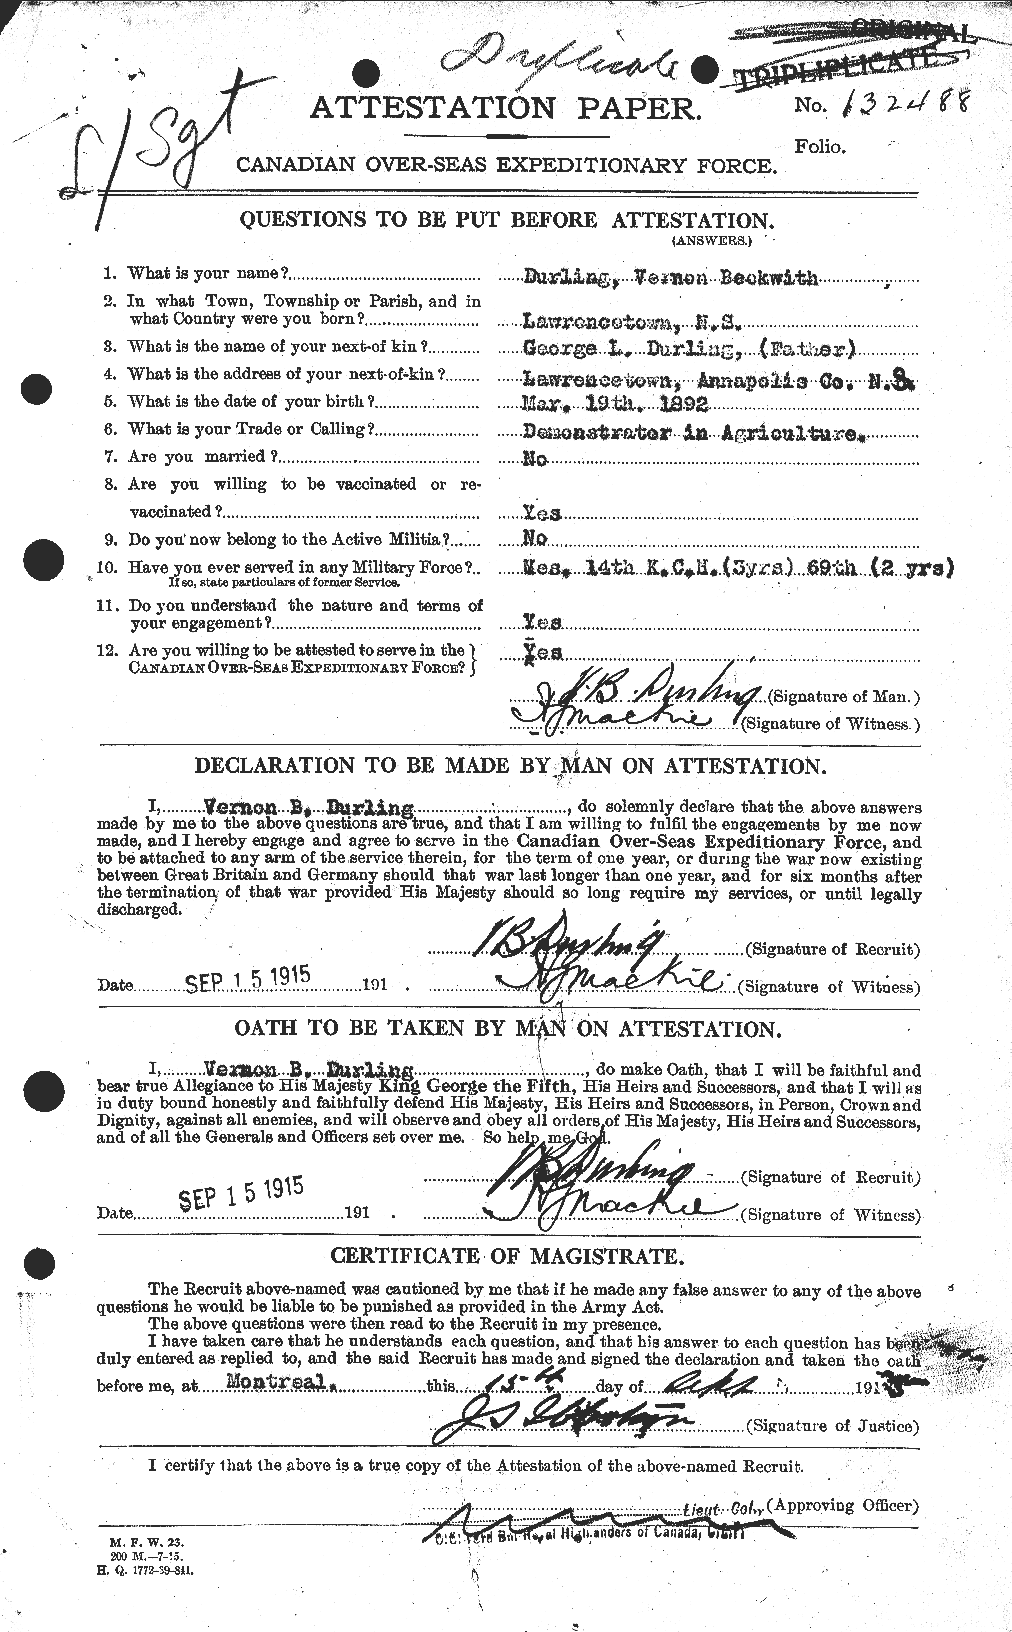 Personnel Records of the First World War - CEF 305255a